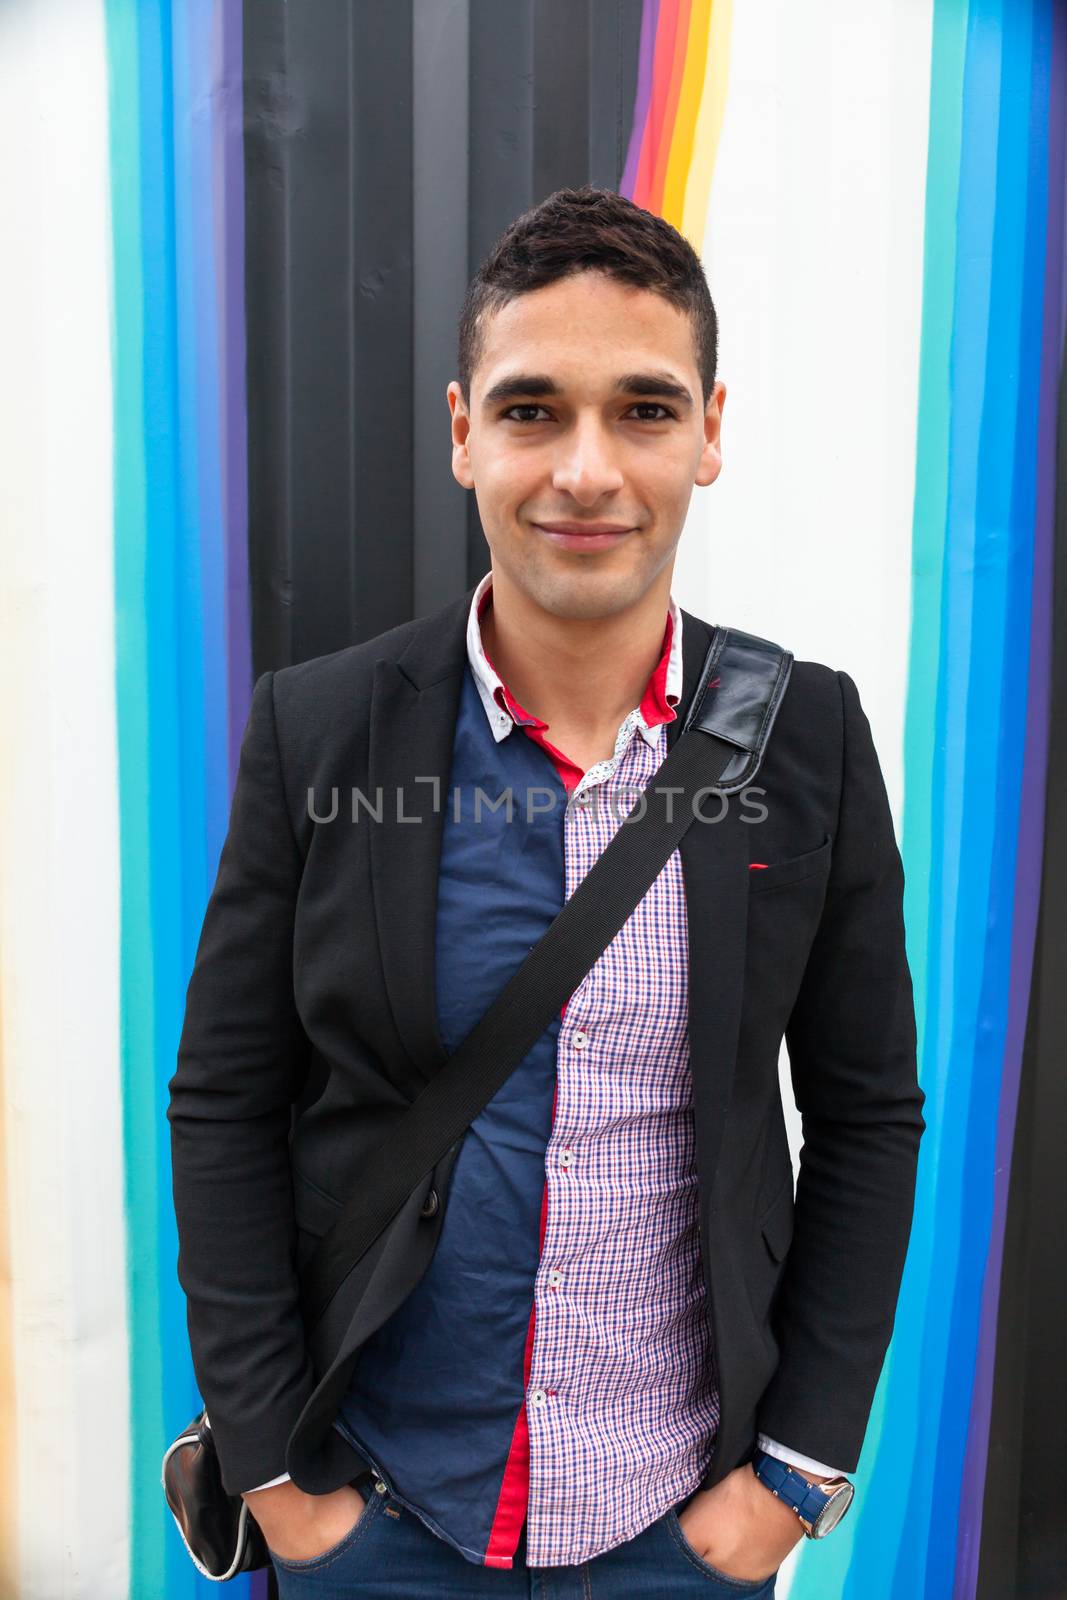 Modern young man with Arab features with shoulder bag and jacket without a tie on multicolored background and the hands in his pocket horizontal photography